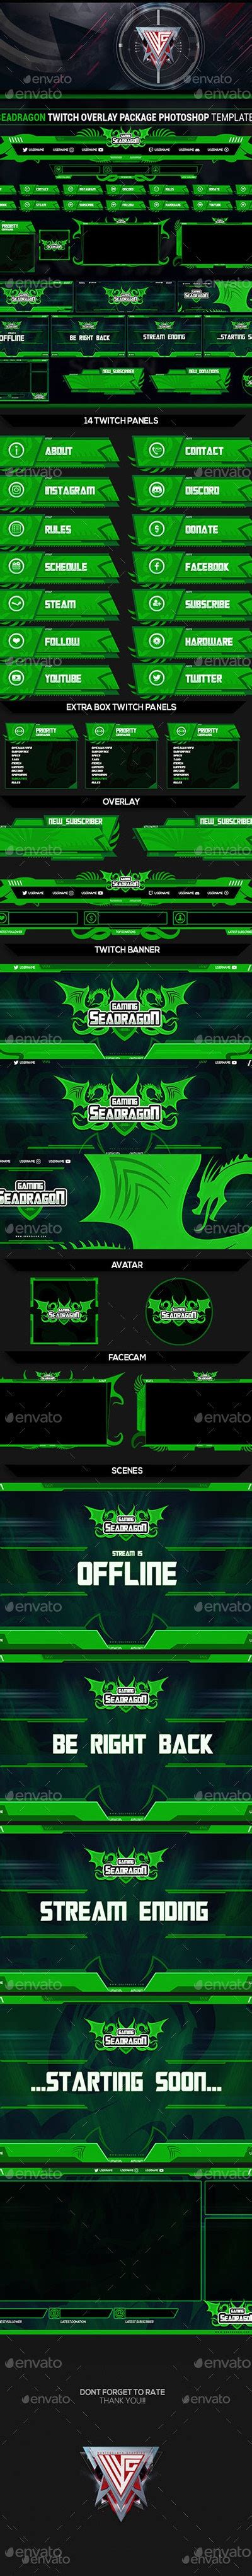 Sea Dragon Twitch Overlay Photoshop Template Web Elements Graphicriver